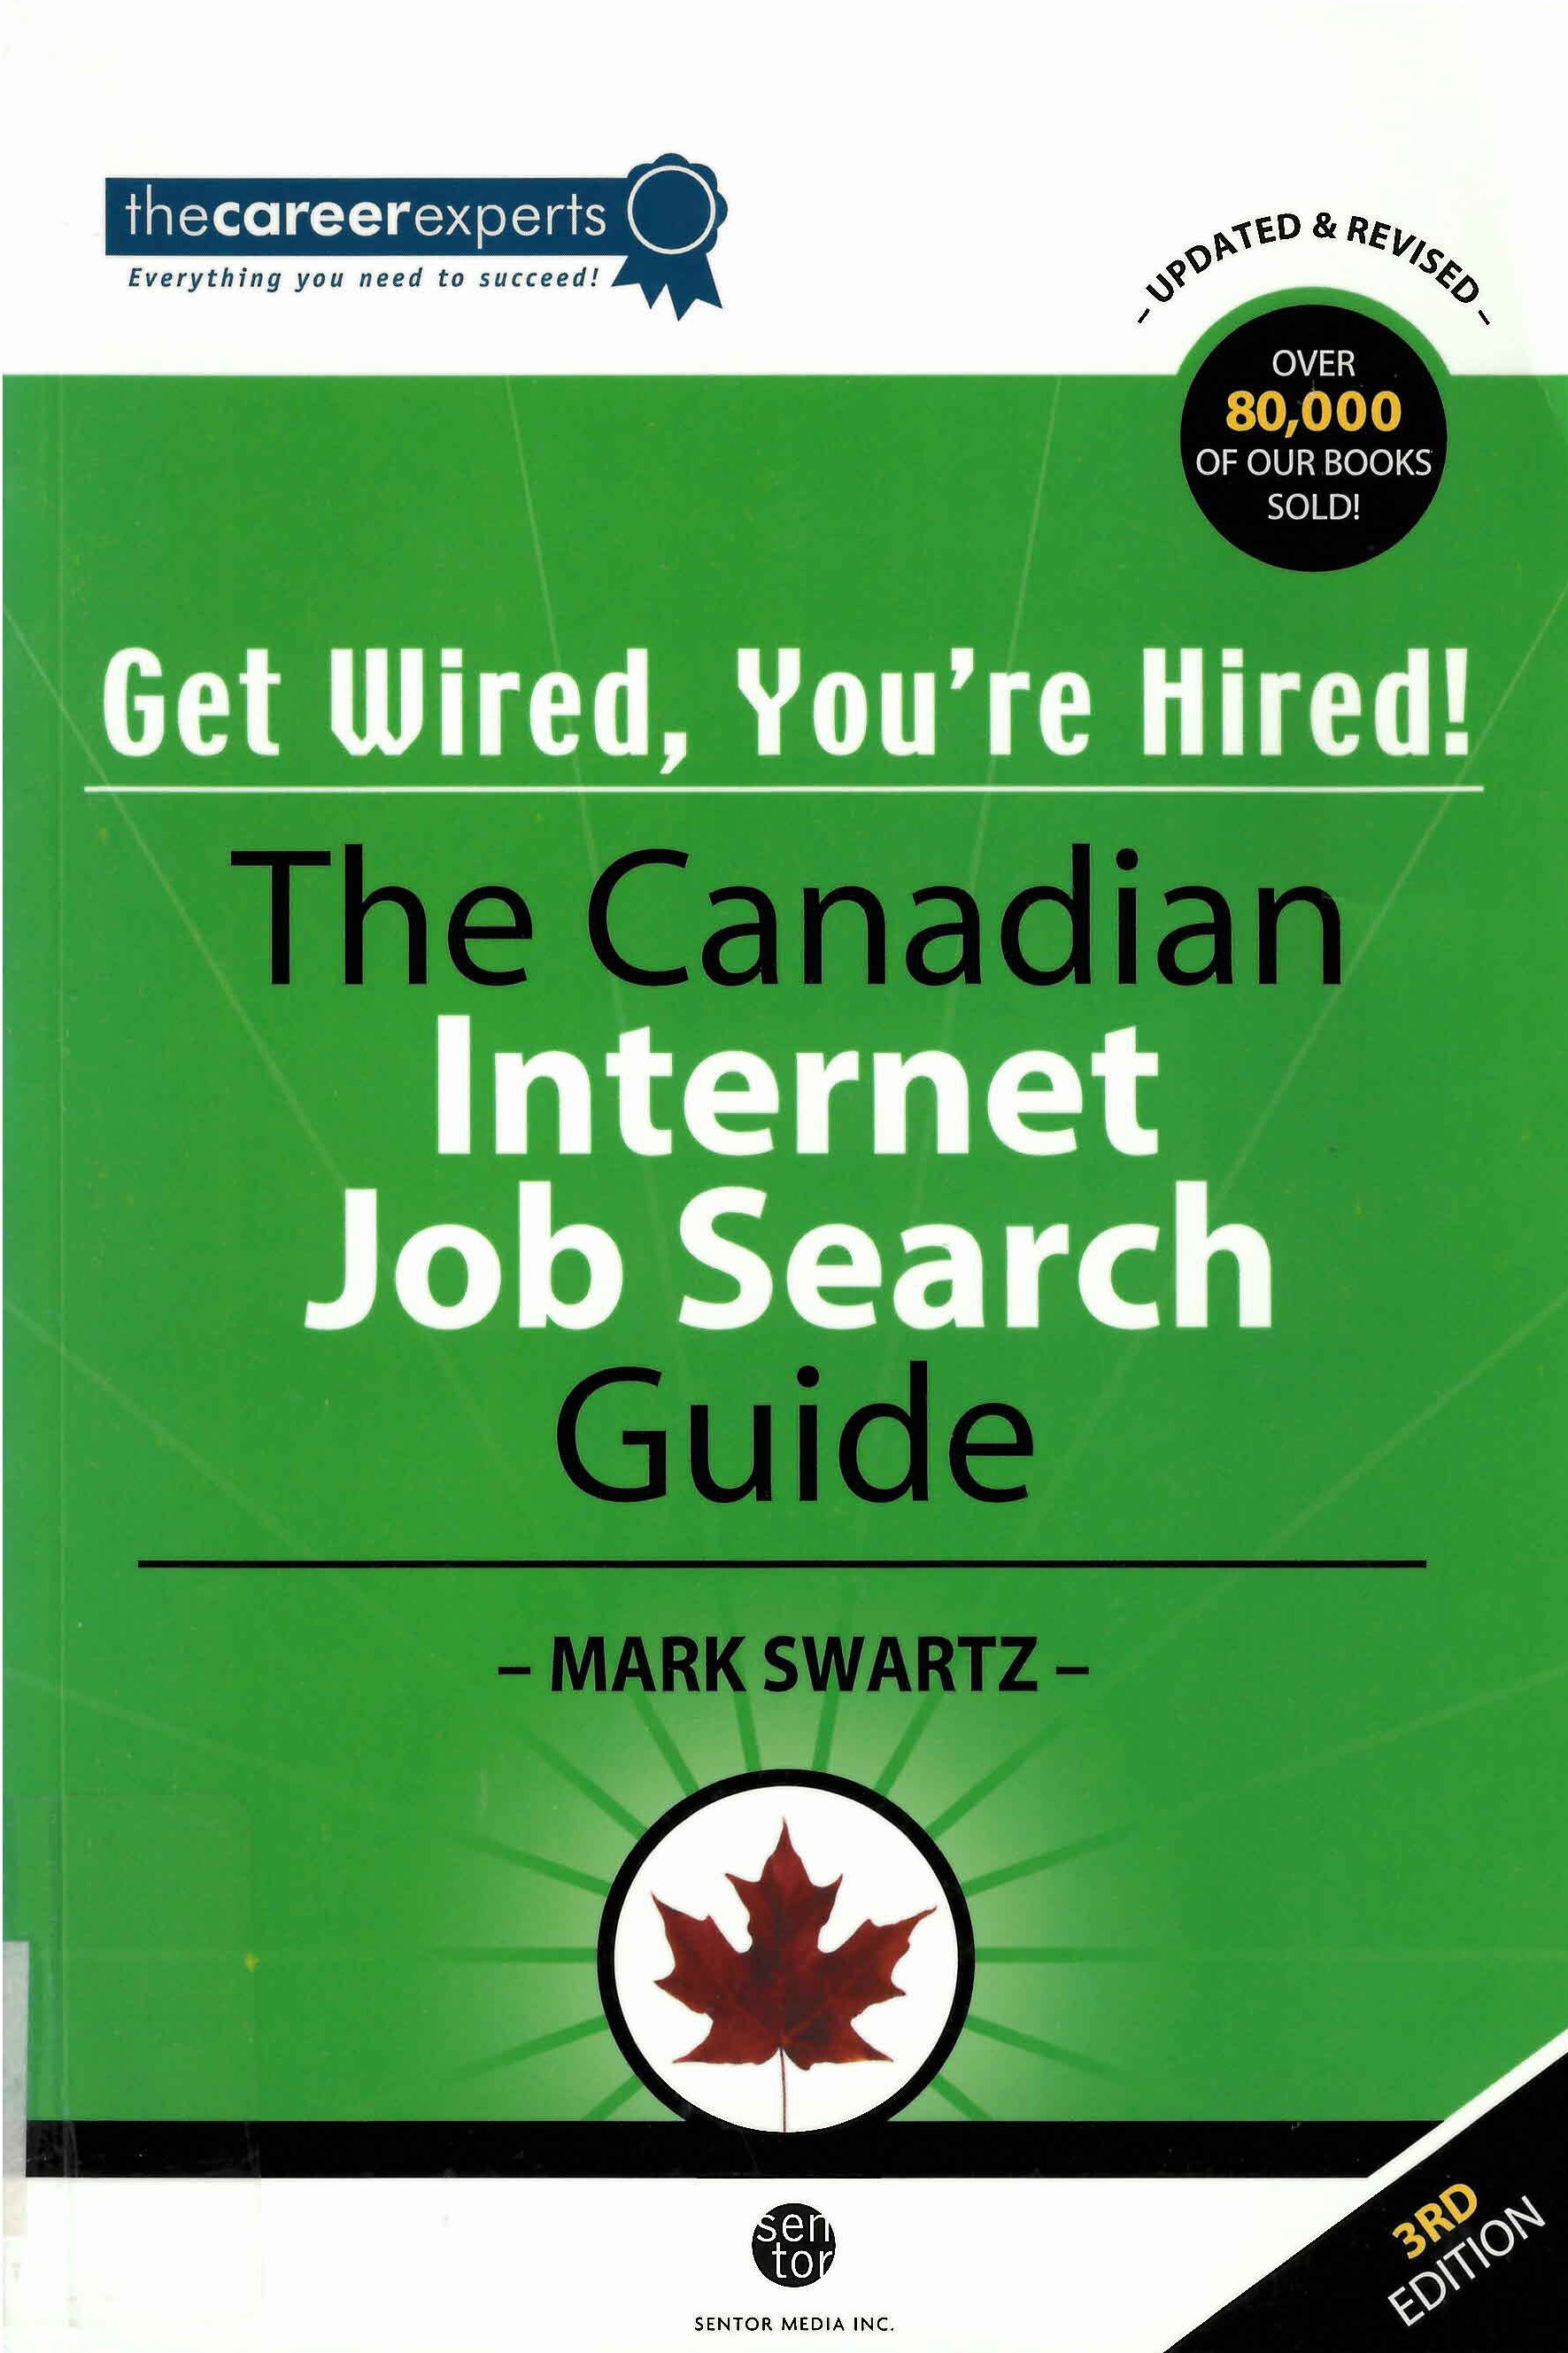 Get wired, you're hired! : the Canadian Internet job search guide